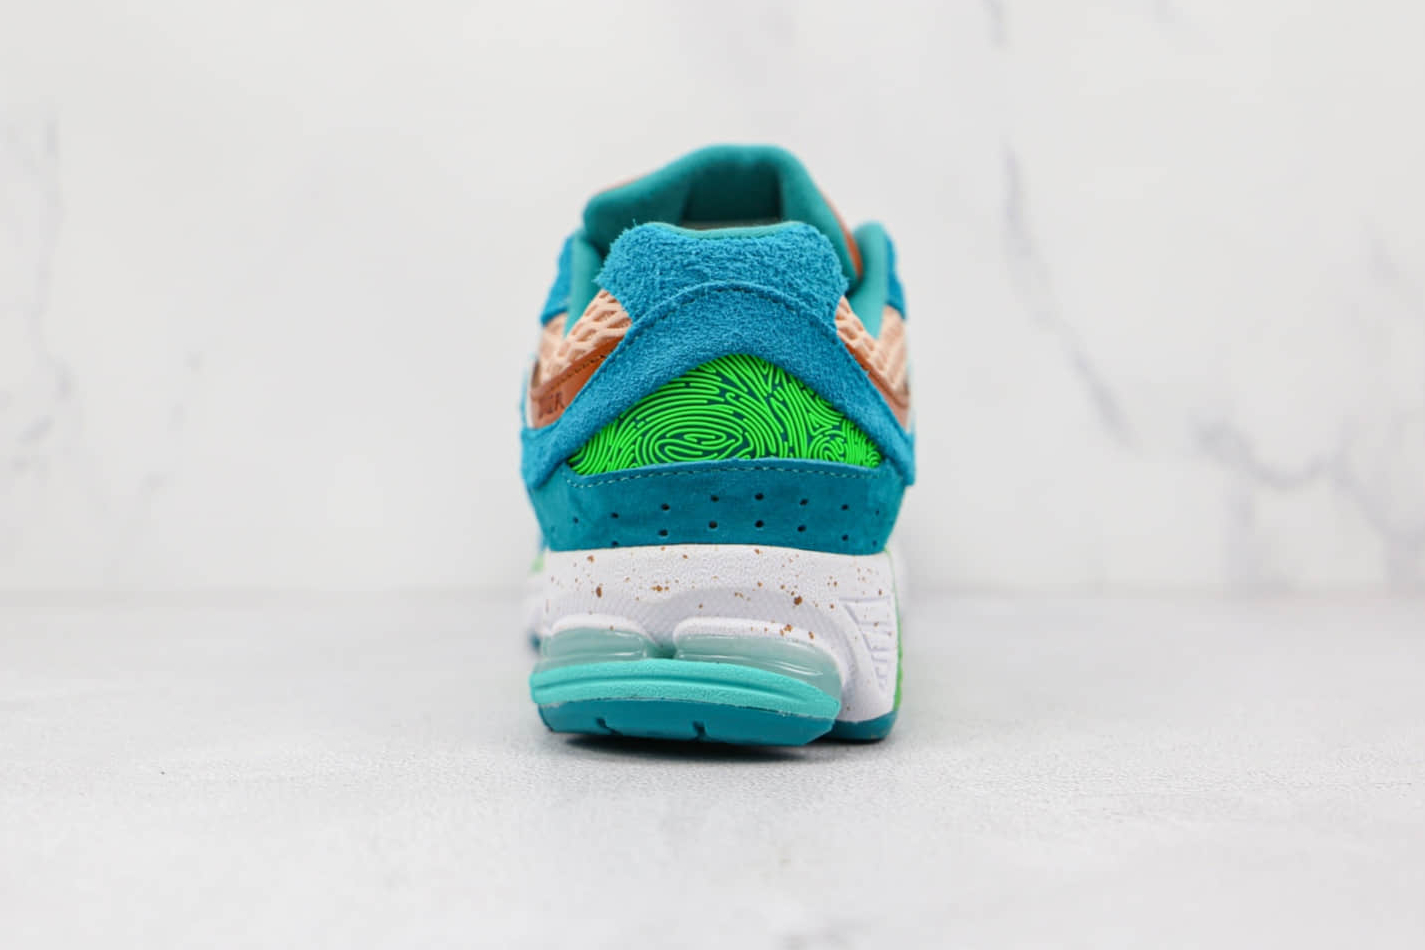 New Balance Salehe Bembury x 2002R 'Water Be The Guide' ML2002RJ - Authentic Collaboration with Exclusive Design